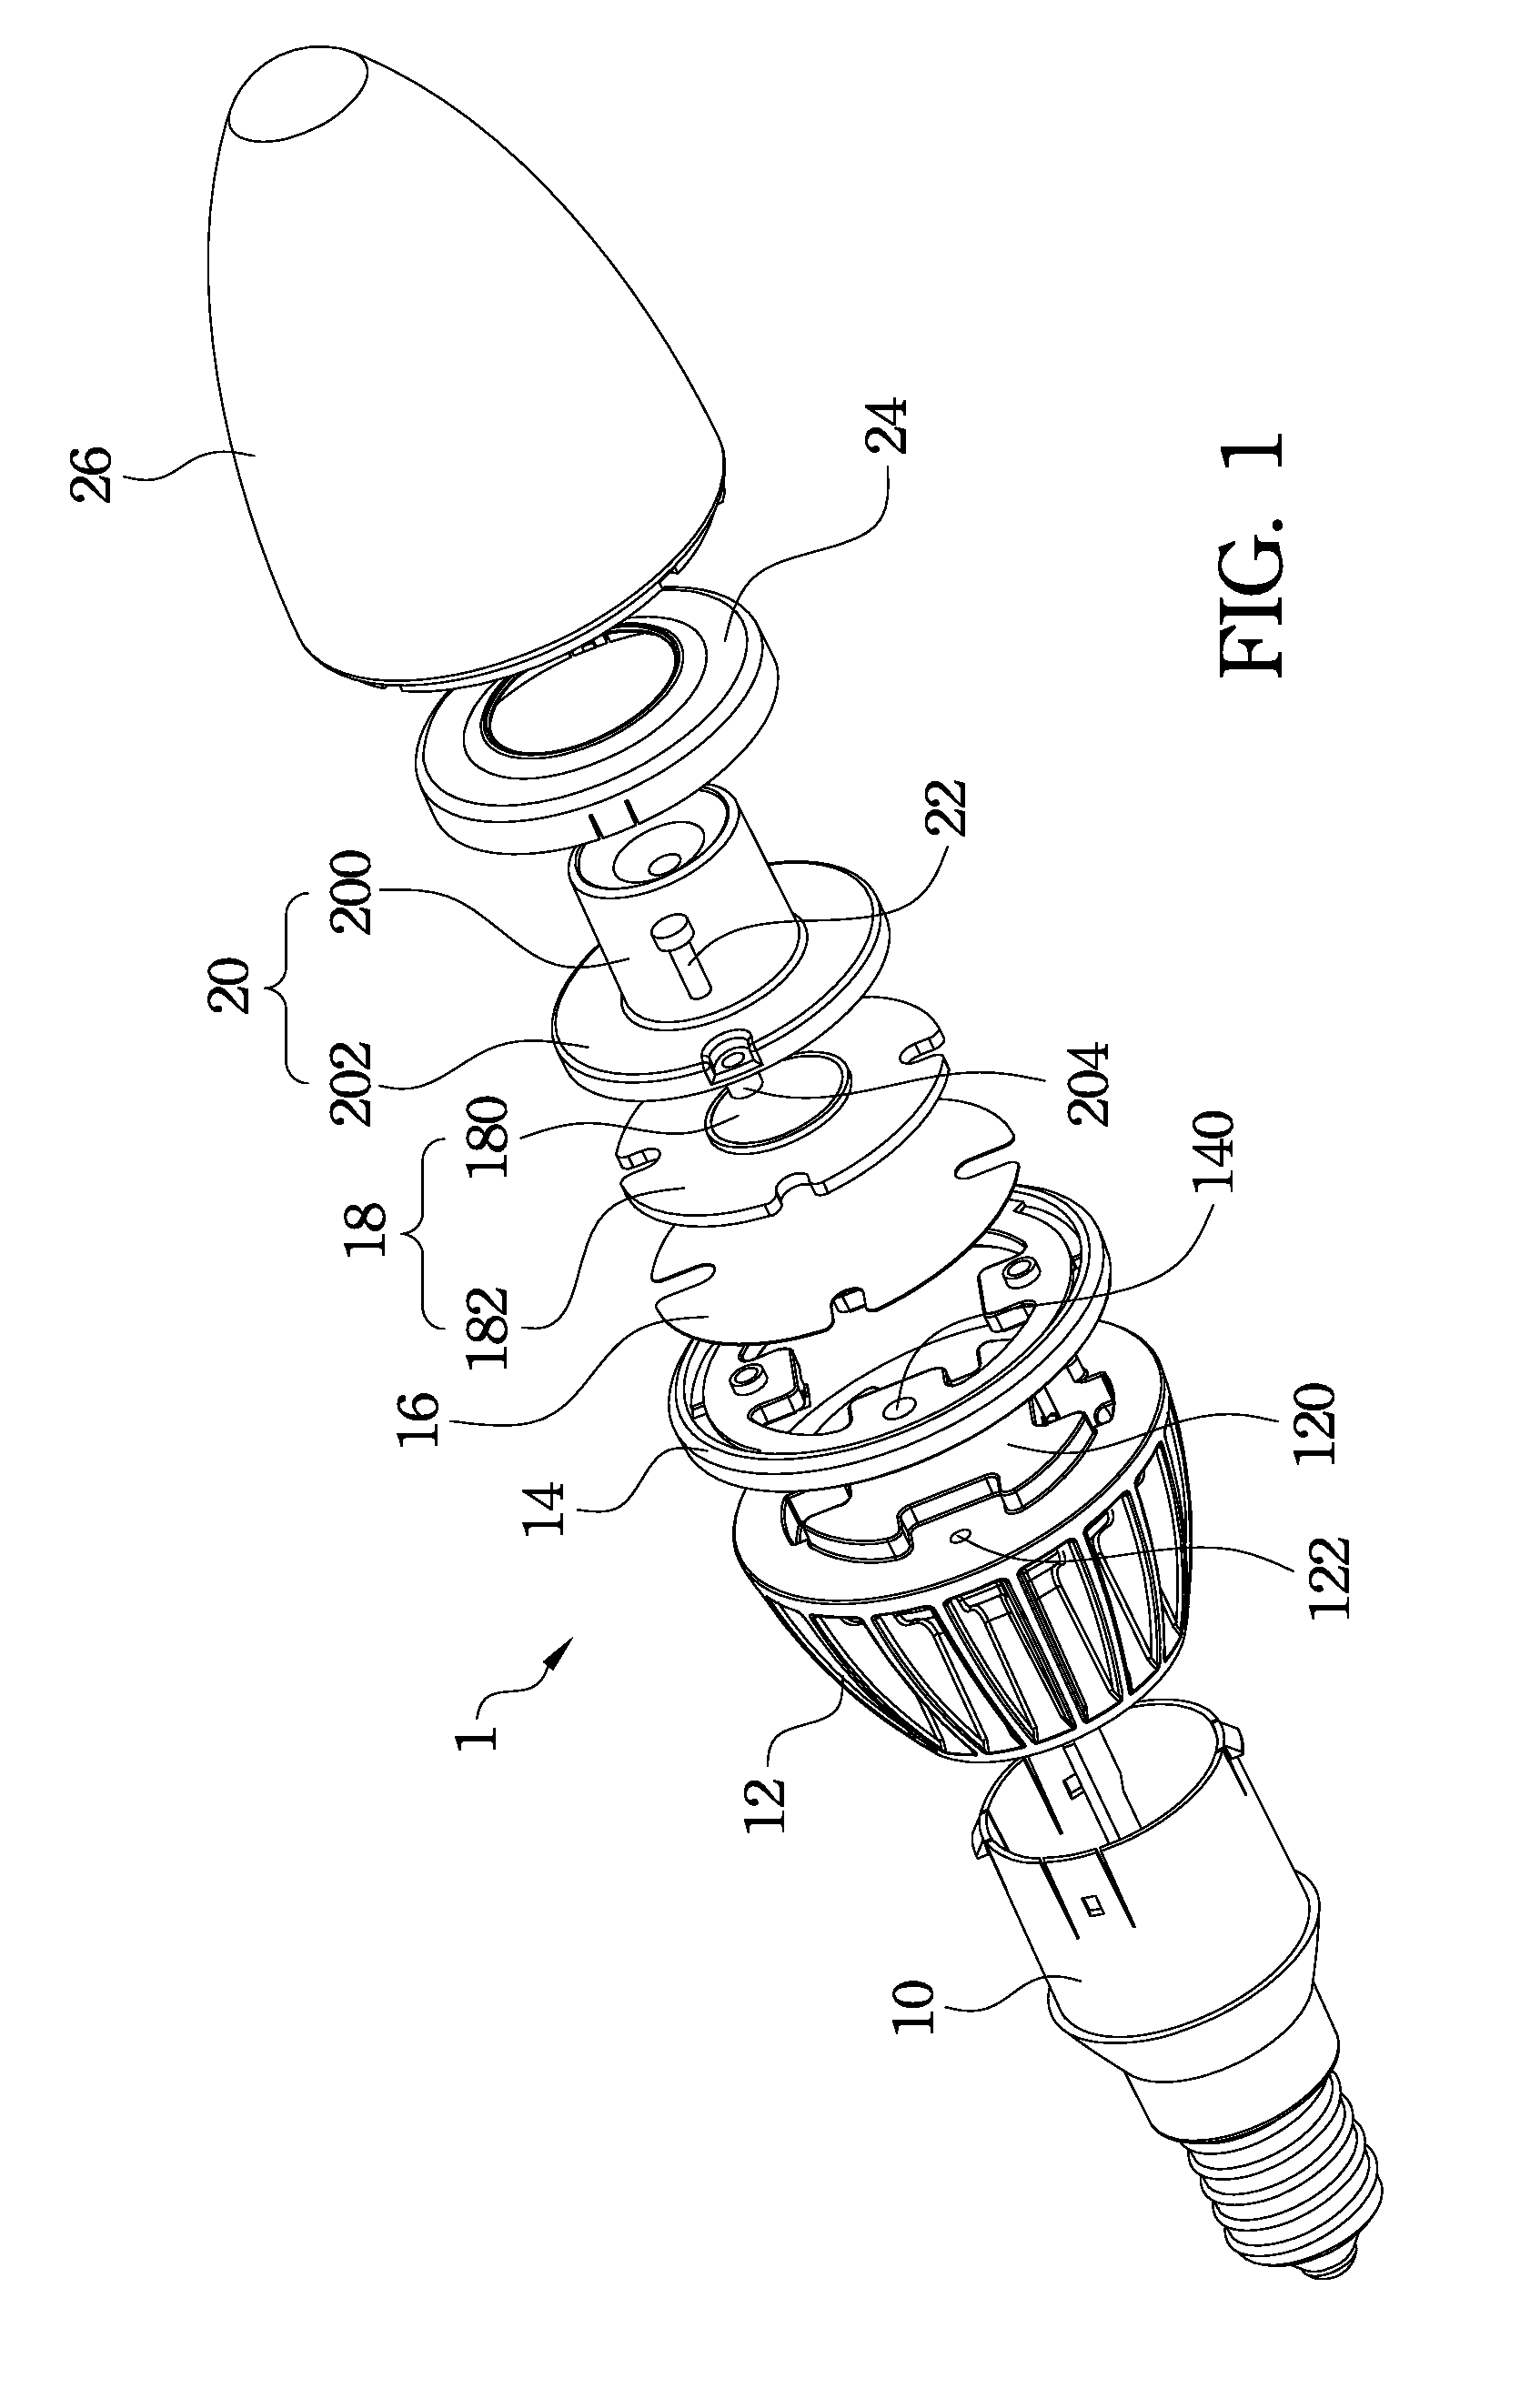 Non-isolating circuit assembly and lamp using the same